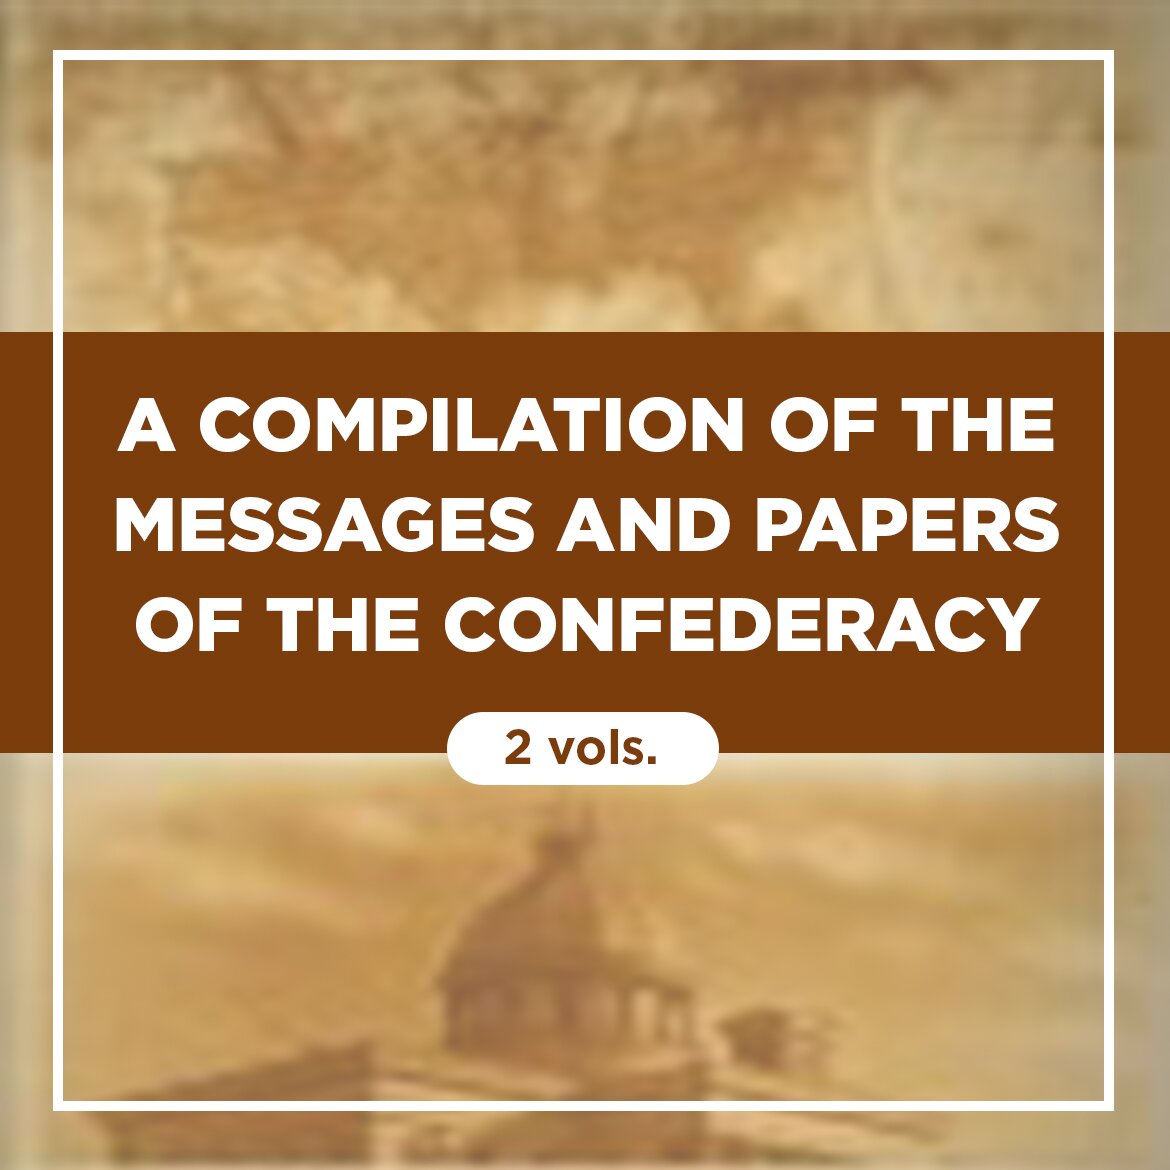 A Compilation of the Messages and Papers of the Confederacy (2 vols.)